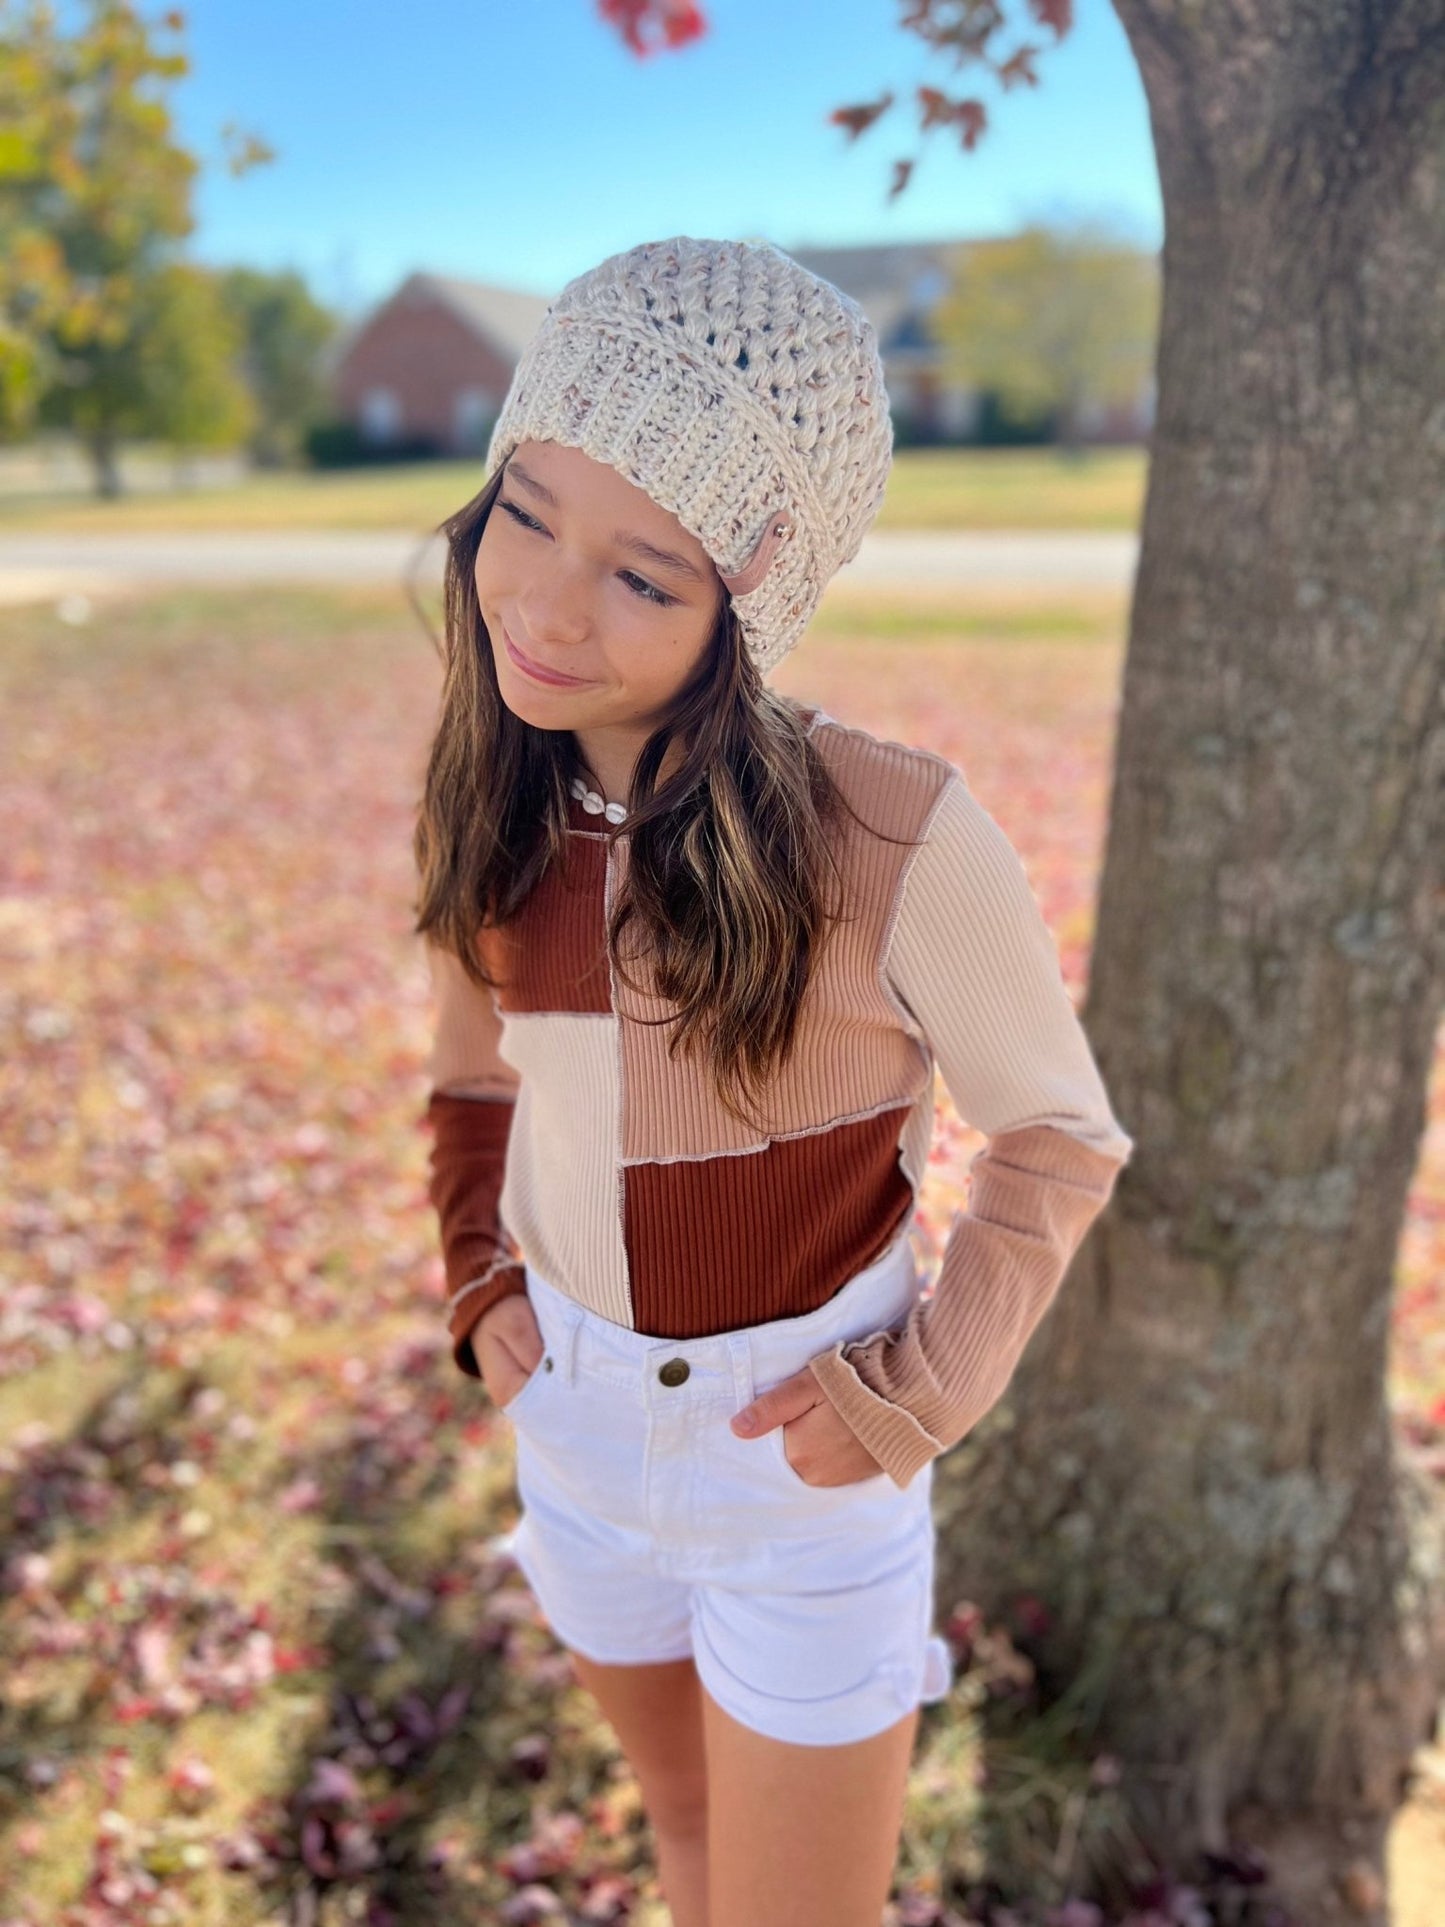 Stylish trendy crochet hat for woman/girl, fall or winter weather crochet hat for girl crochet hat for women “mom and me” hat set,great gift - Lilly Grace Sparkle Boutique